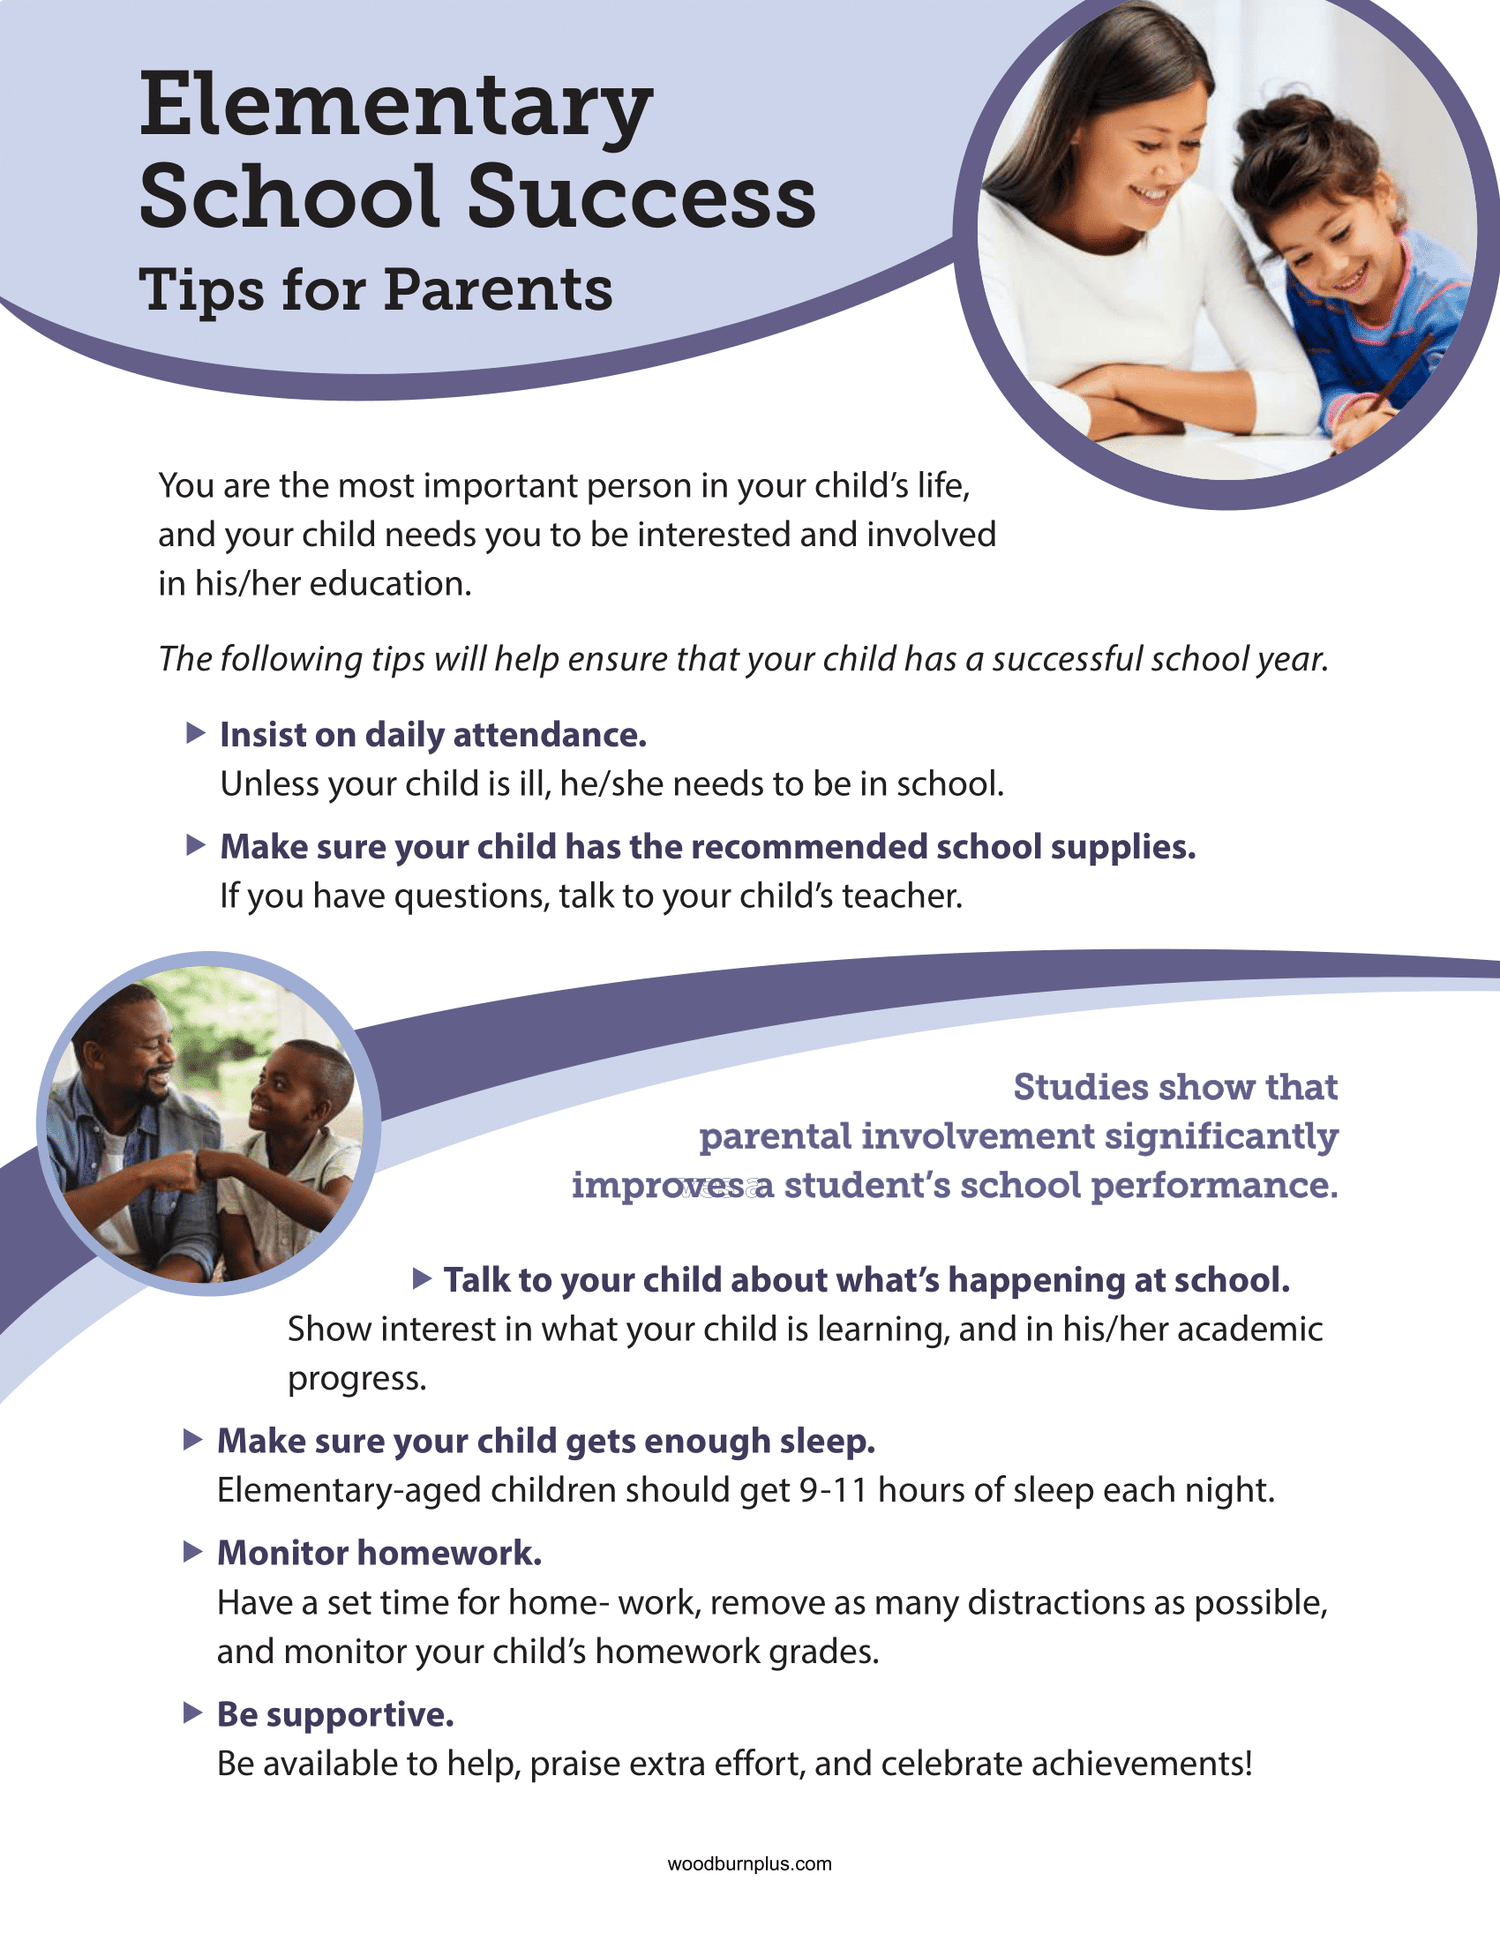 Elementary School Success - Tips for Parents